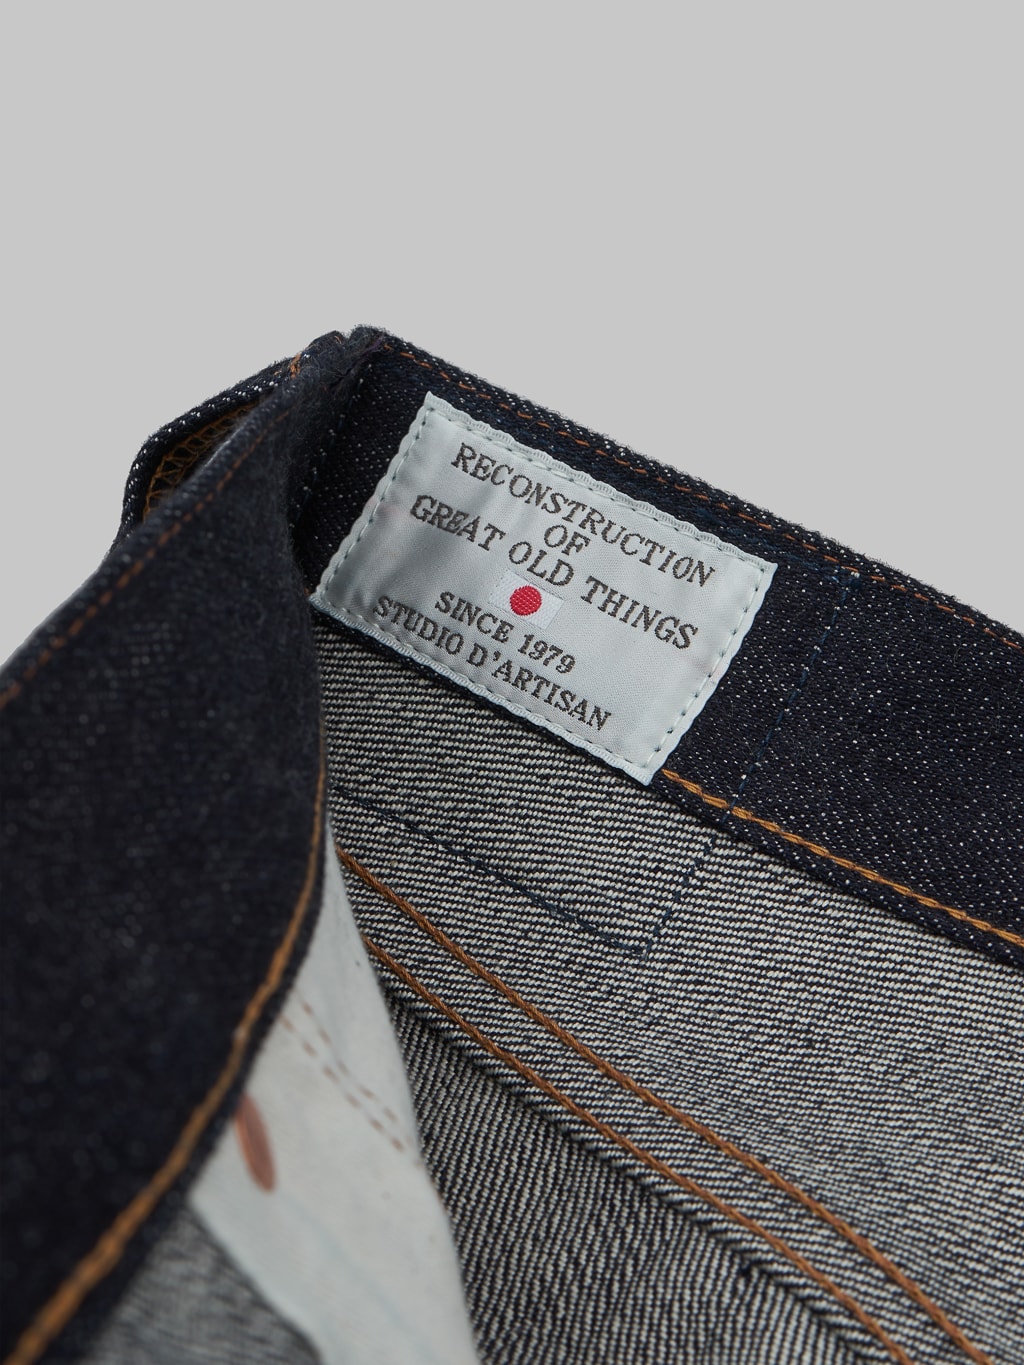 Studio dartisan suvin gold relaxed tapered jeans brand tag